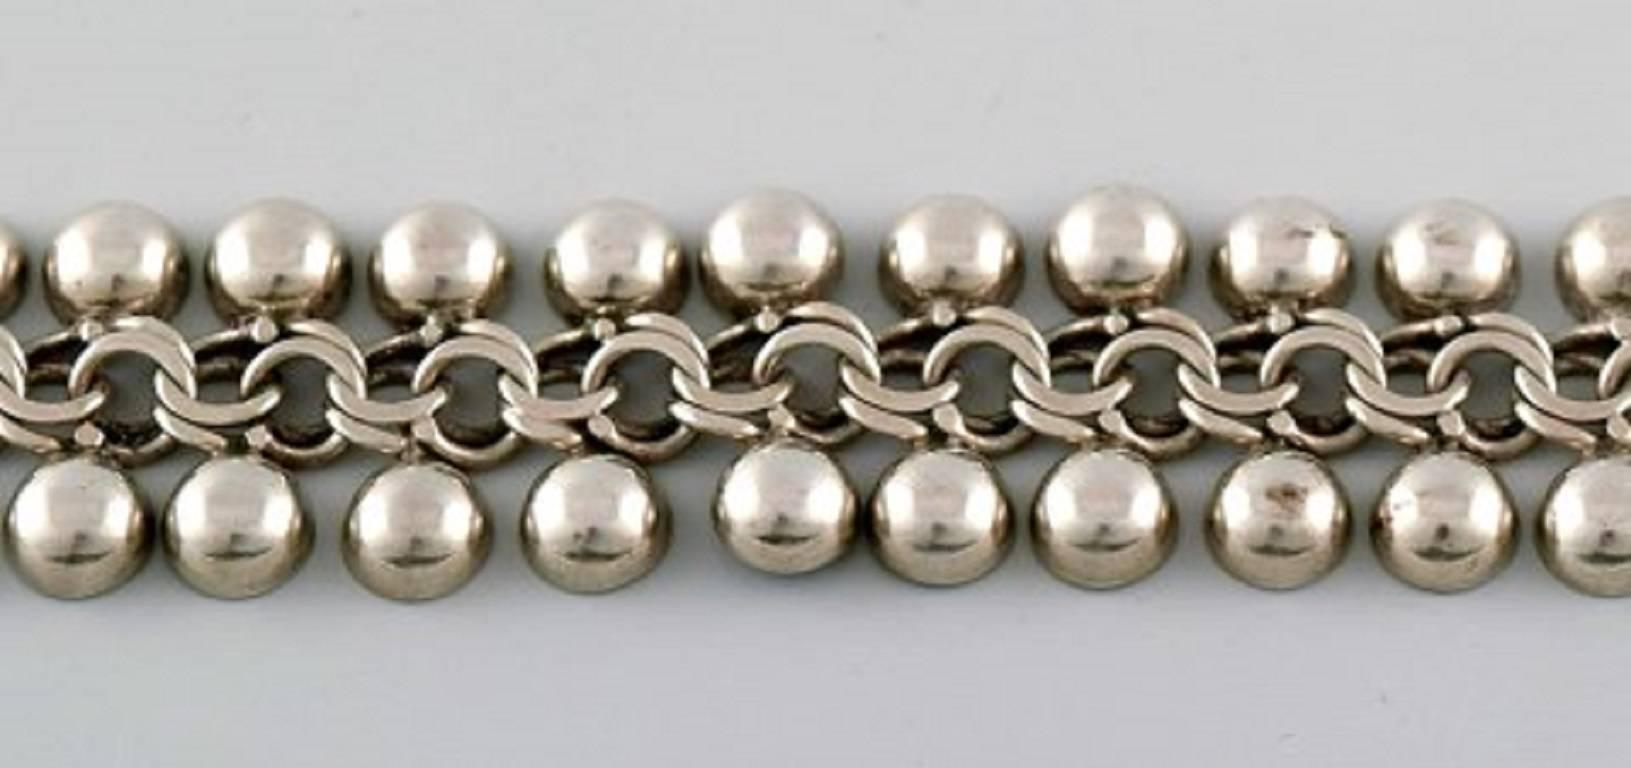 Vintage Danish silver bracelet in modern design, stamped HS, 830S.
1930 / 40s.
In perfect condition.
Measures 17 cm.